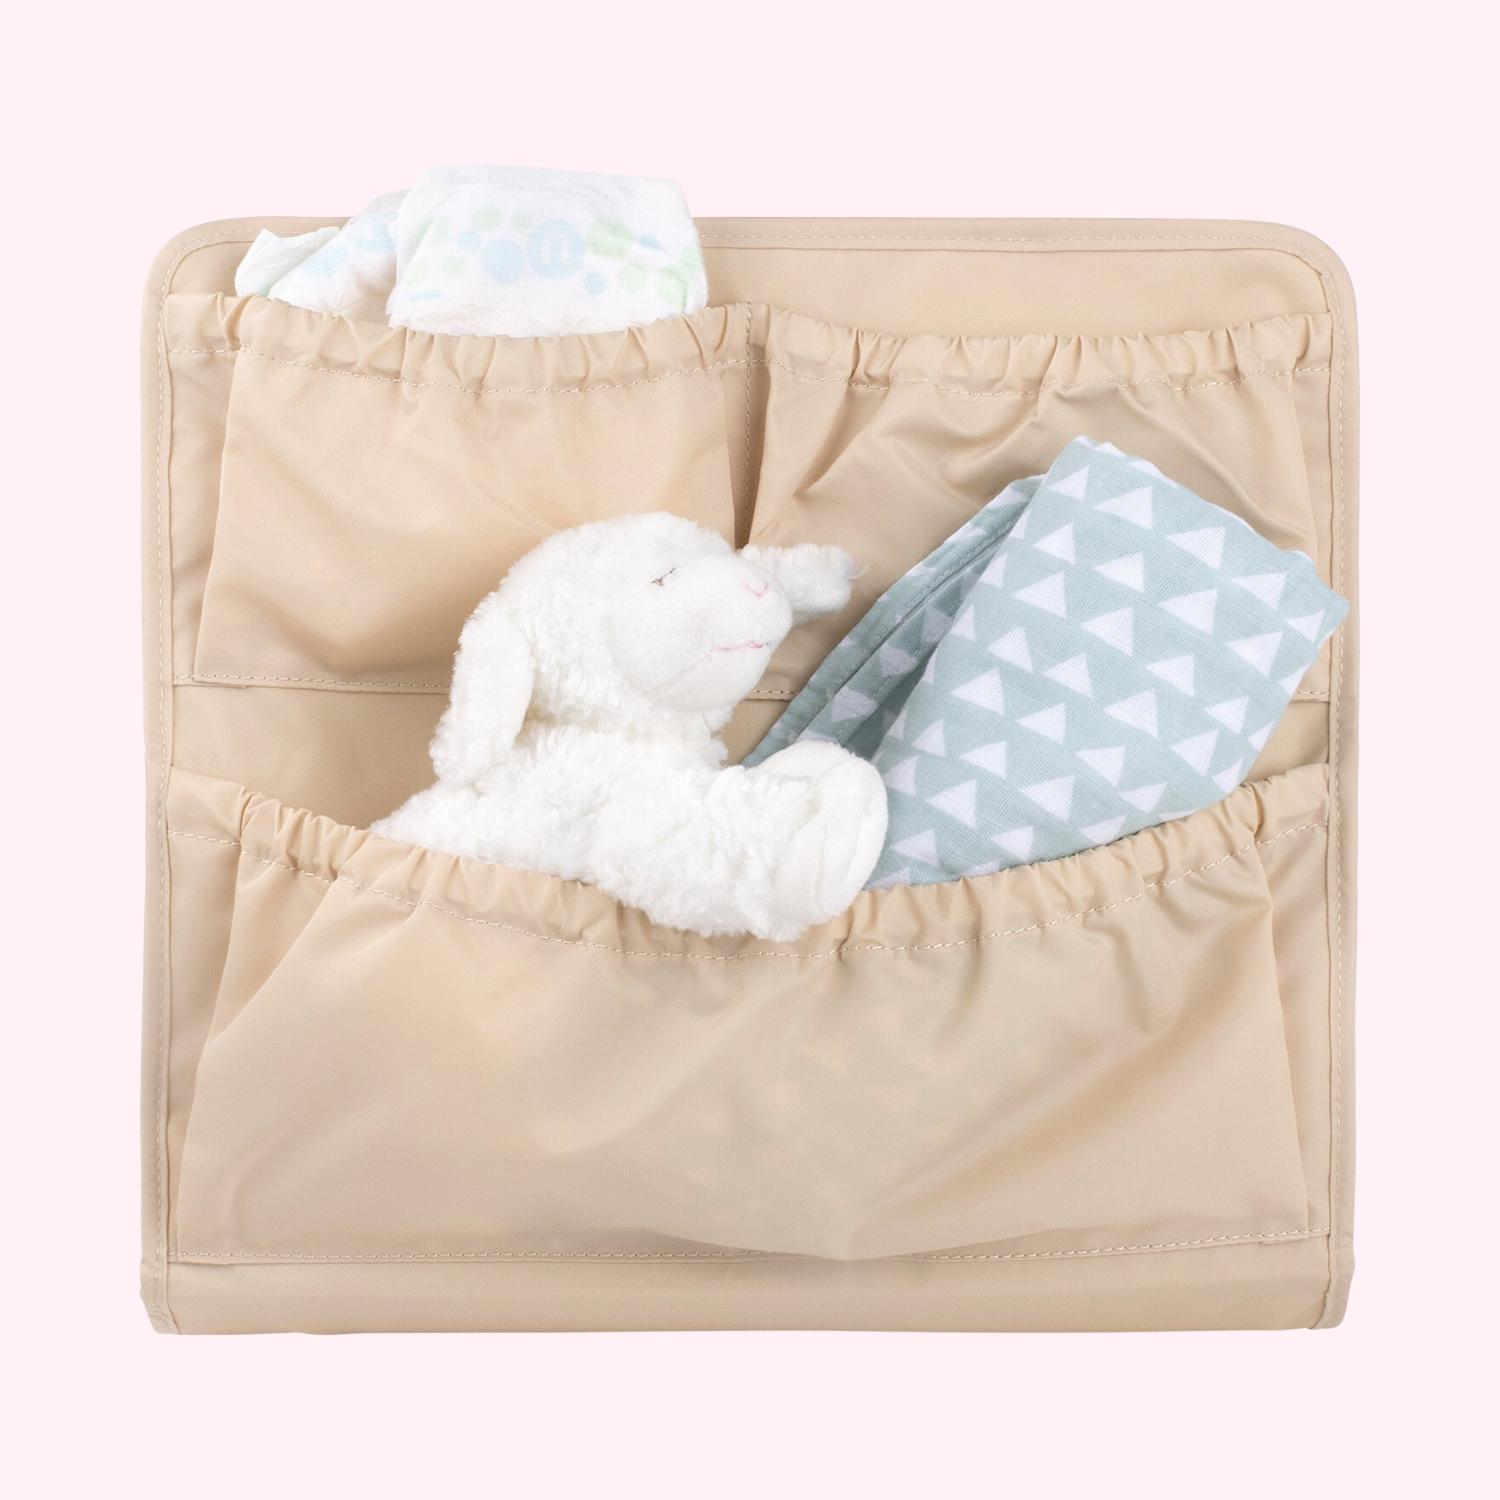 The Nappy Society  Baby Bag Inserts on Instagram: Ladies, our